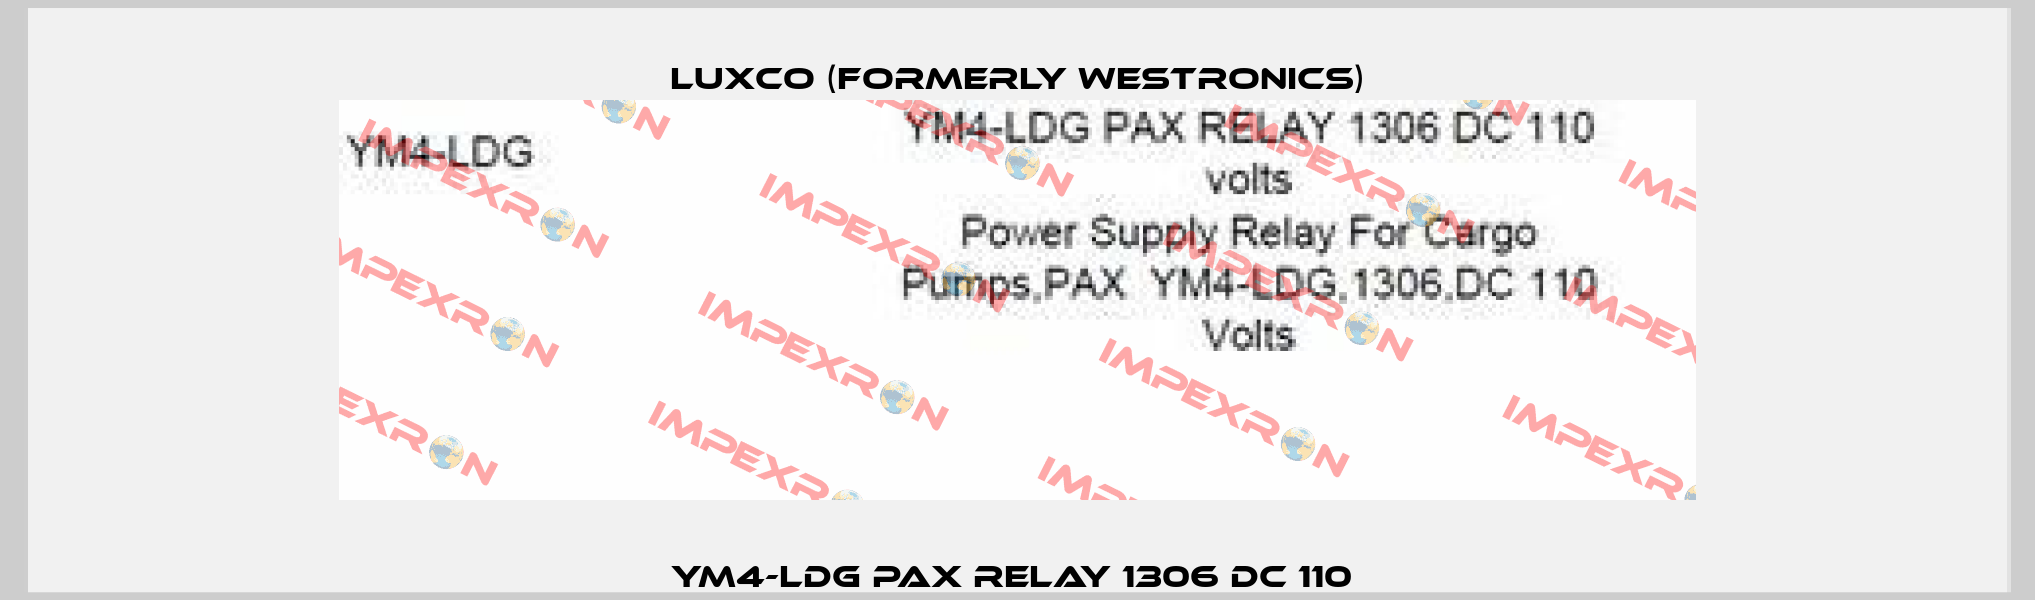 YM4-LDG PAX RELAY 1306 DC 110  Luxco (formerly Westronics)